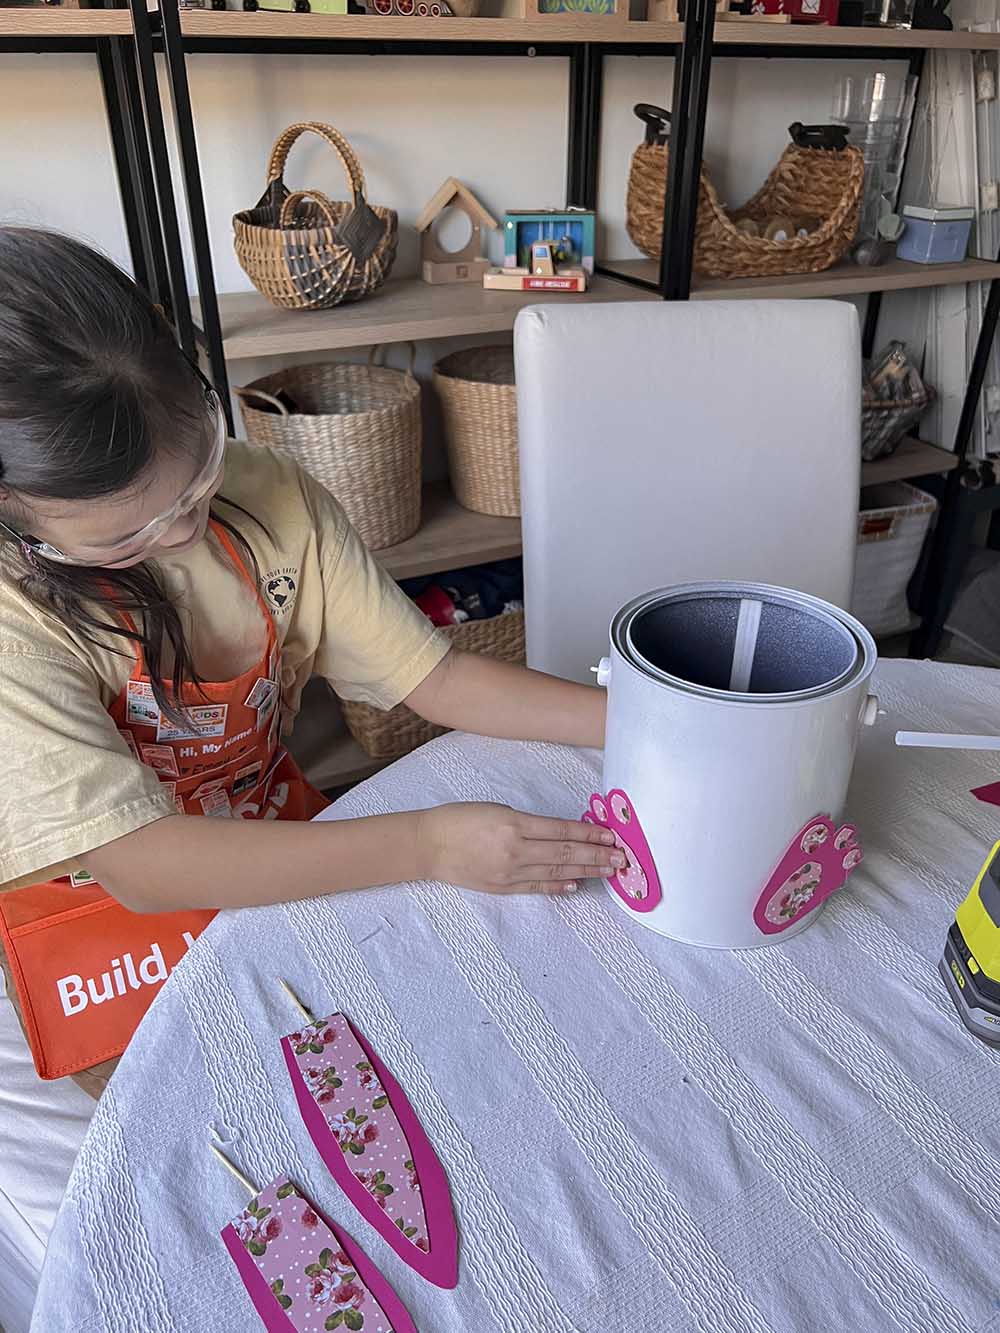 Girl placing paper cut outs of bunny feet on paint bucket.